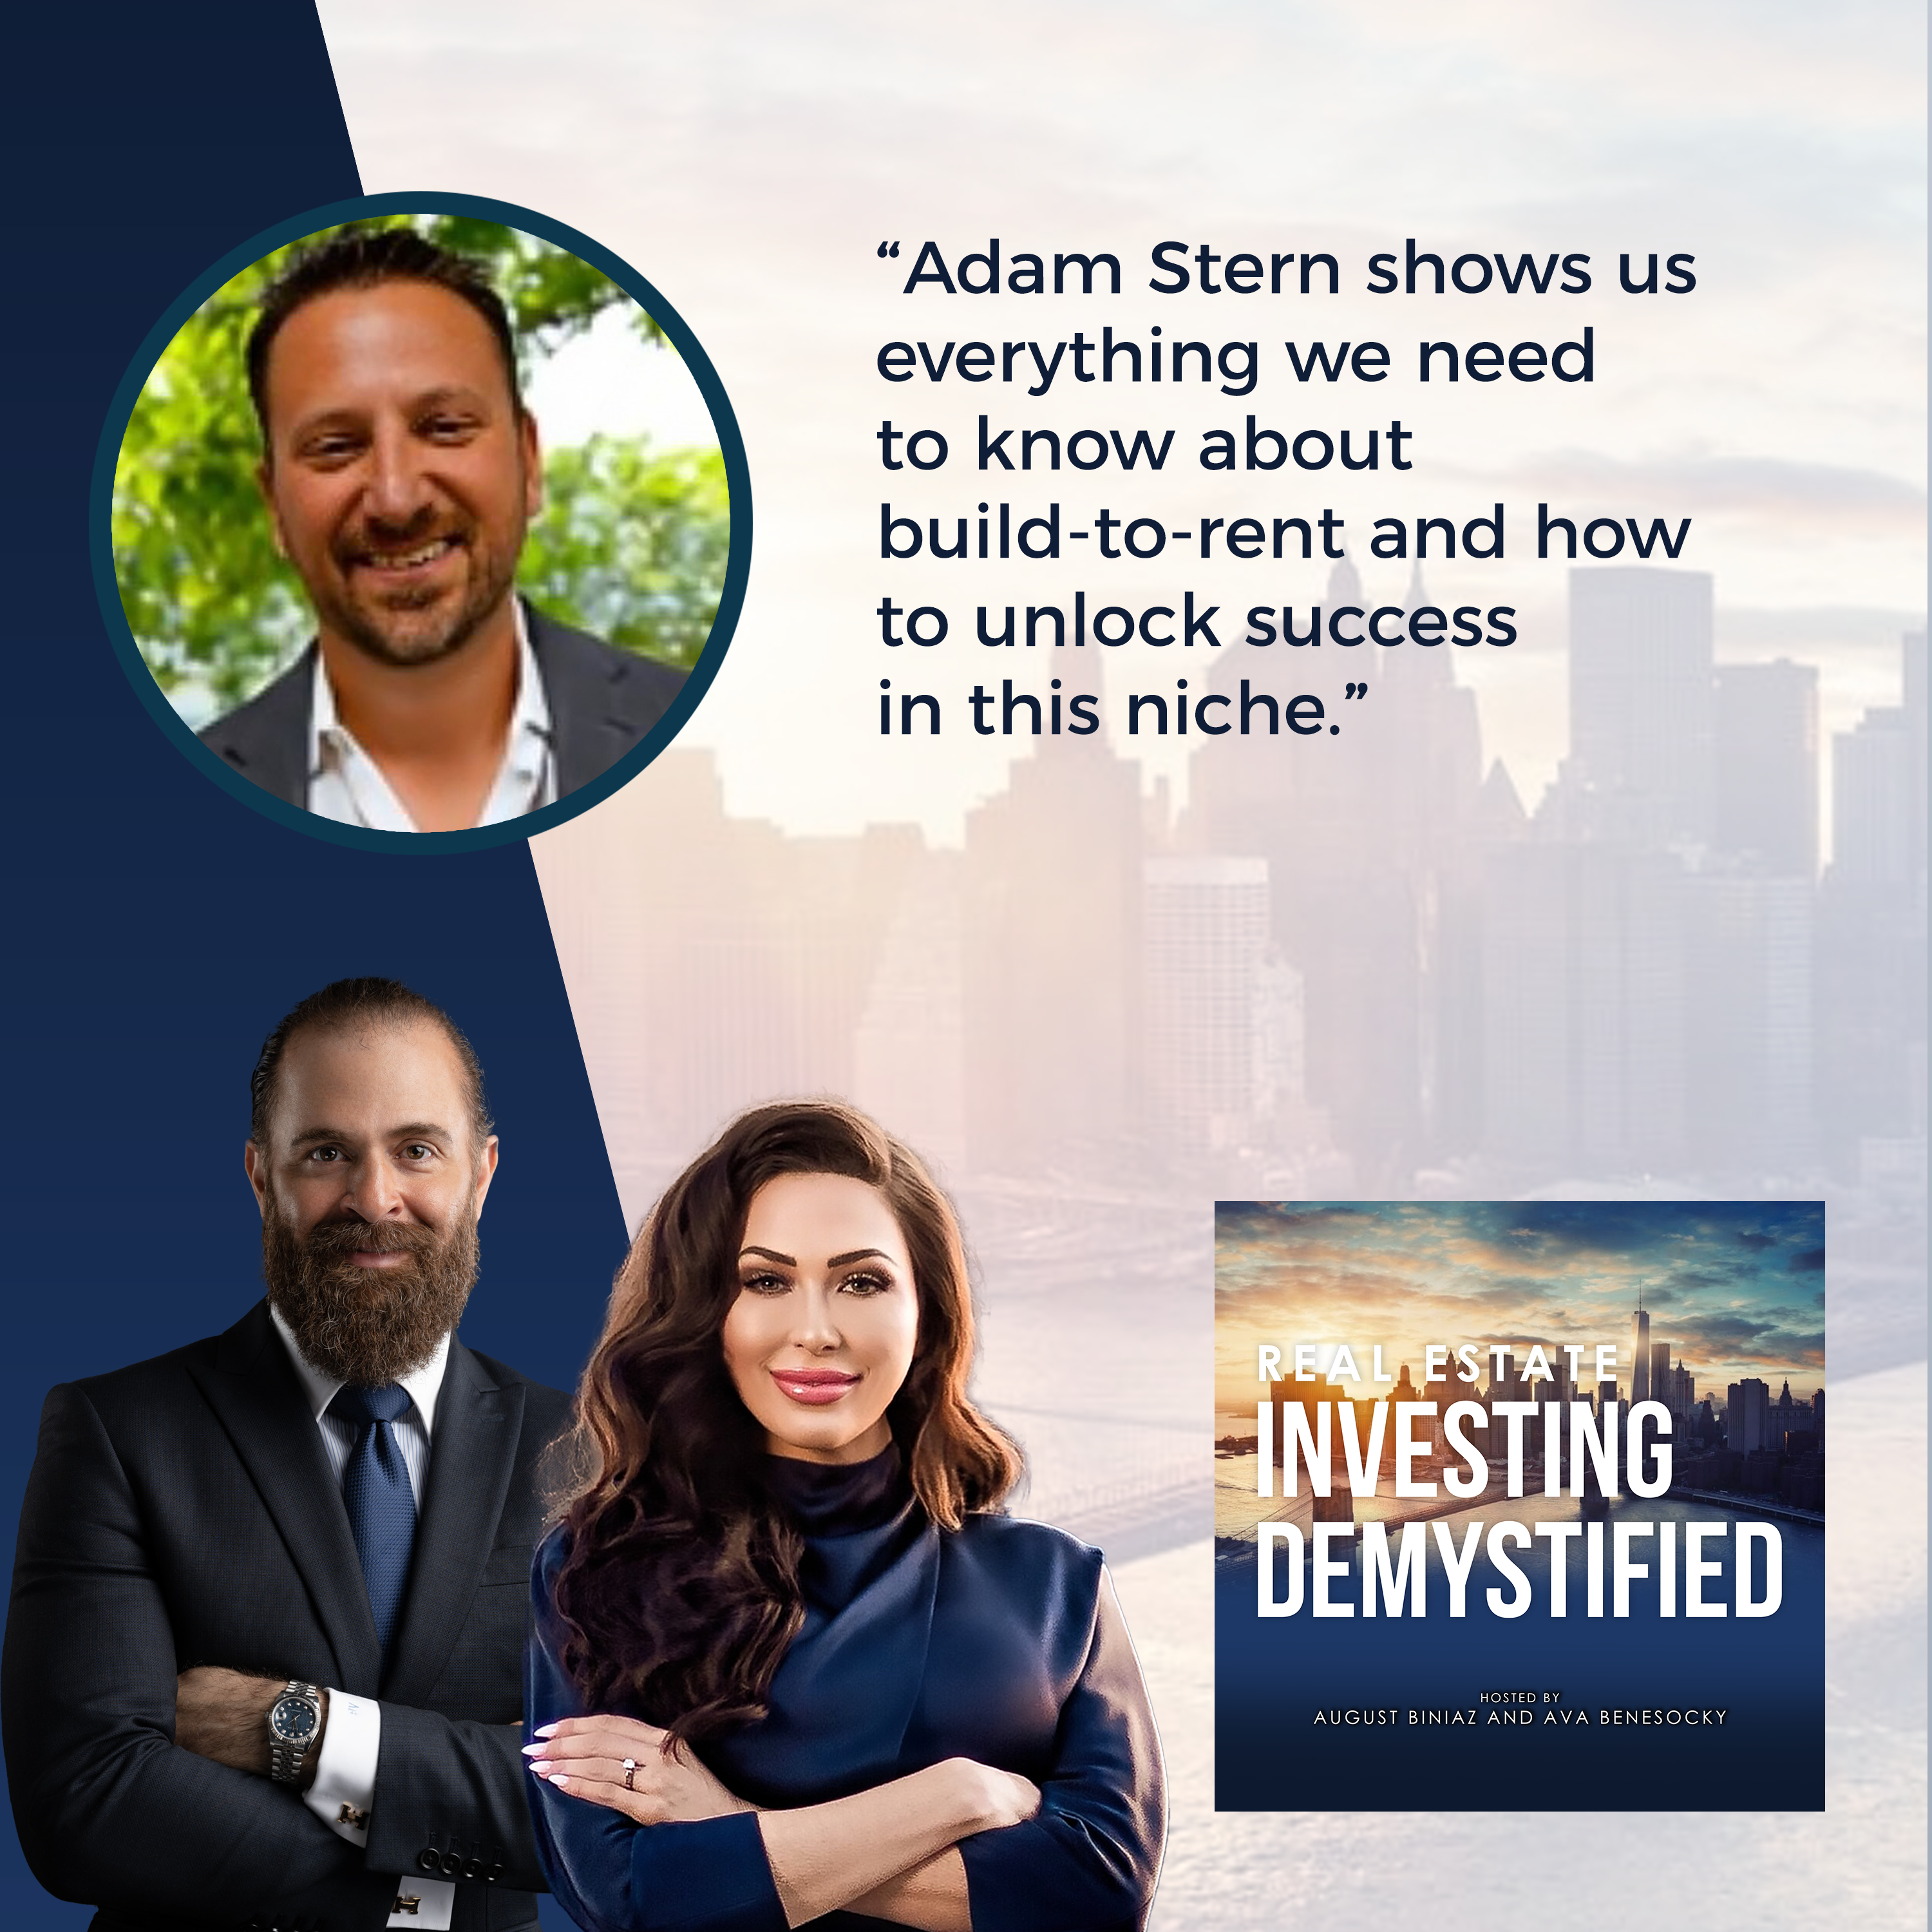 Real Estate Investing Demystified | Adam Stern | Build To Rent